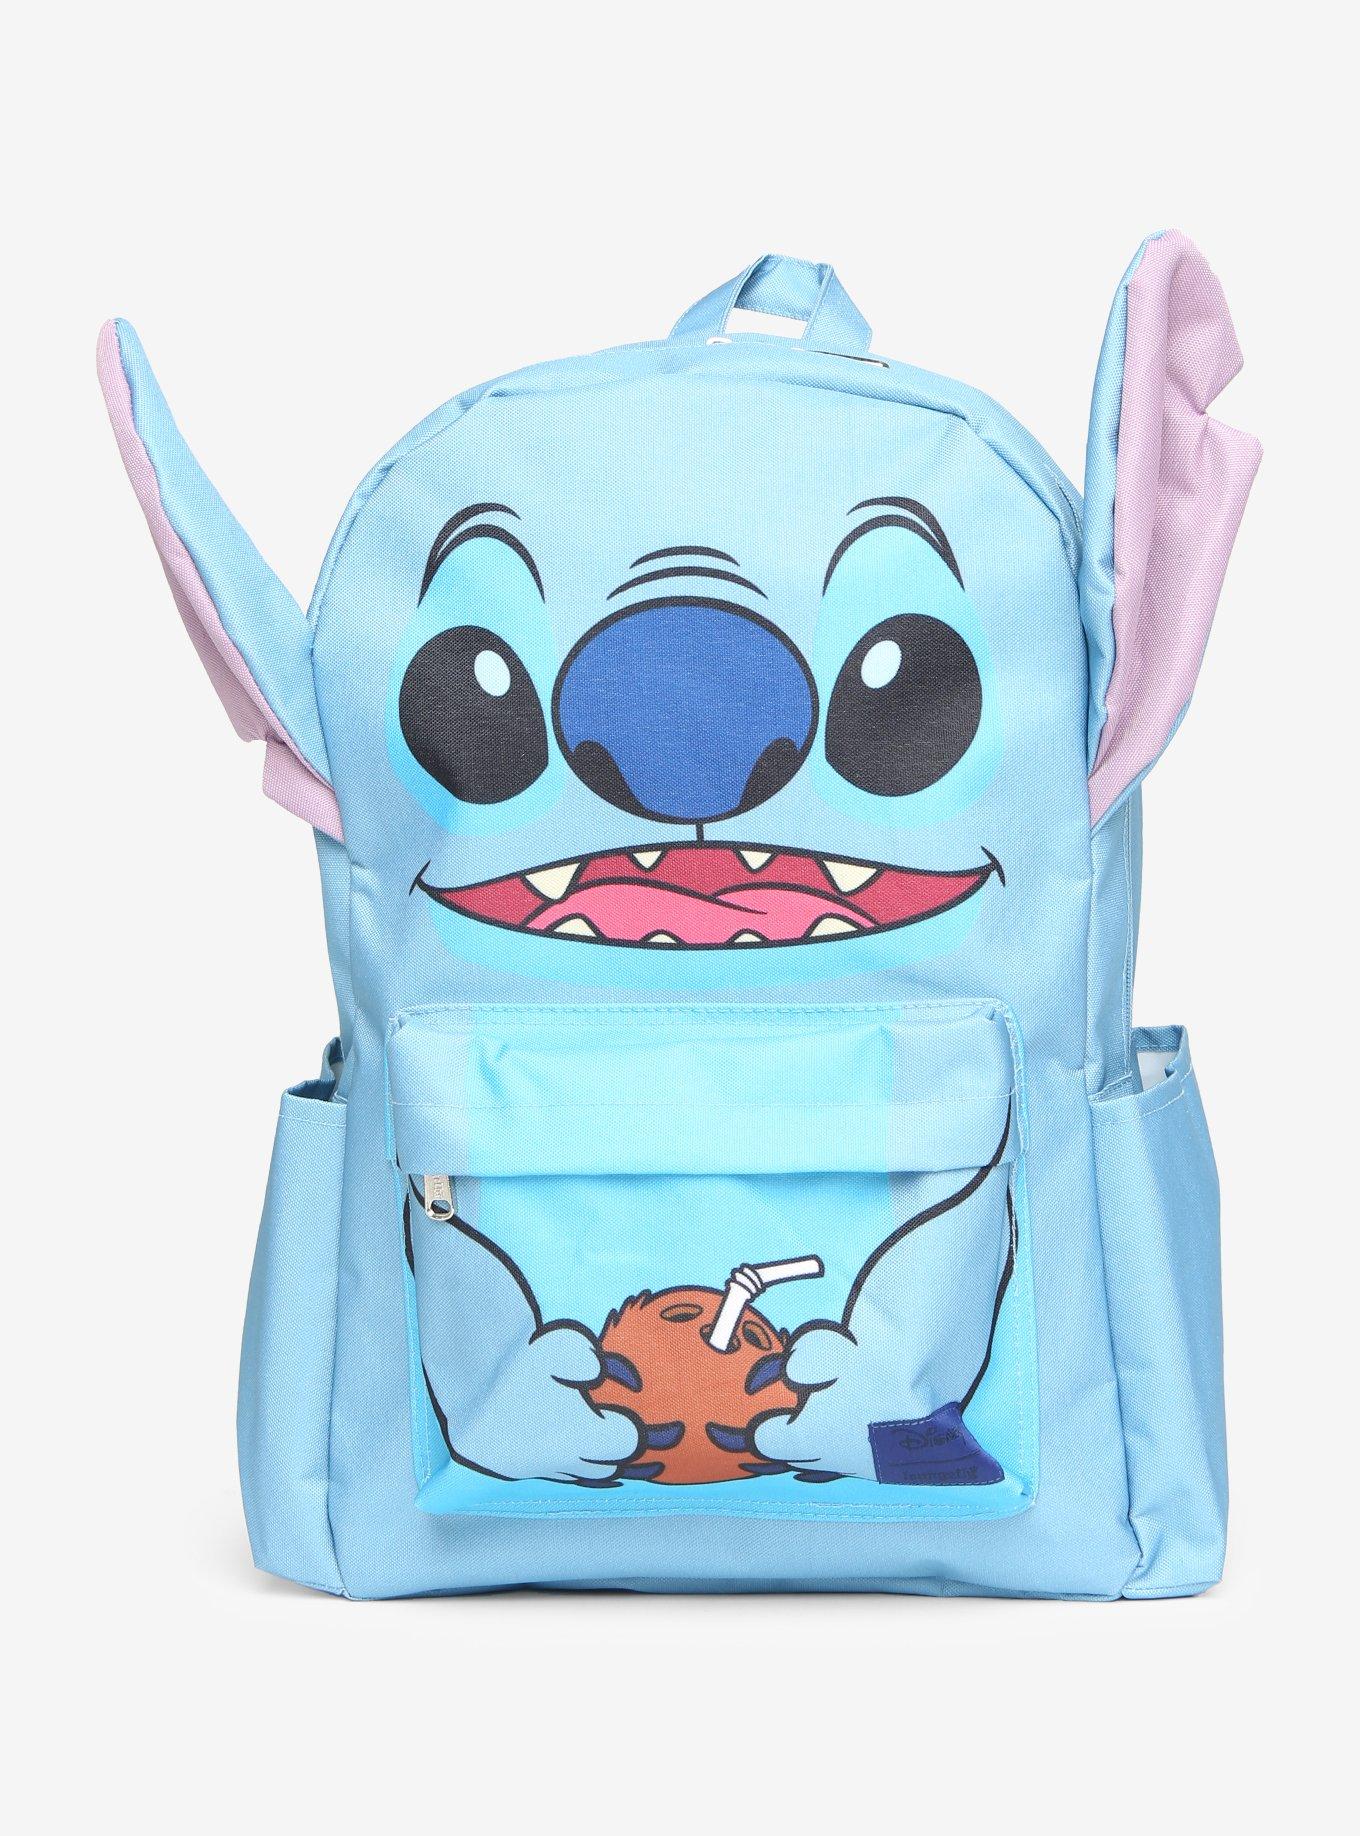 New Loungefly x Disney Lilo and Stitch Coconut Backpack Laptop Bag